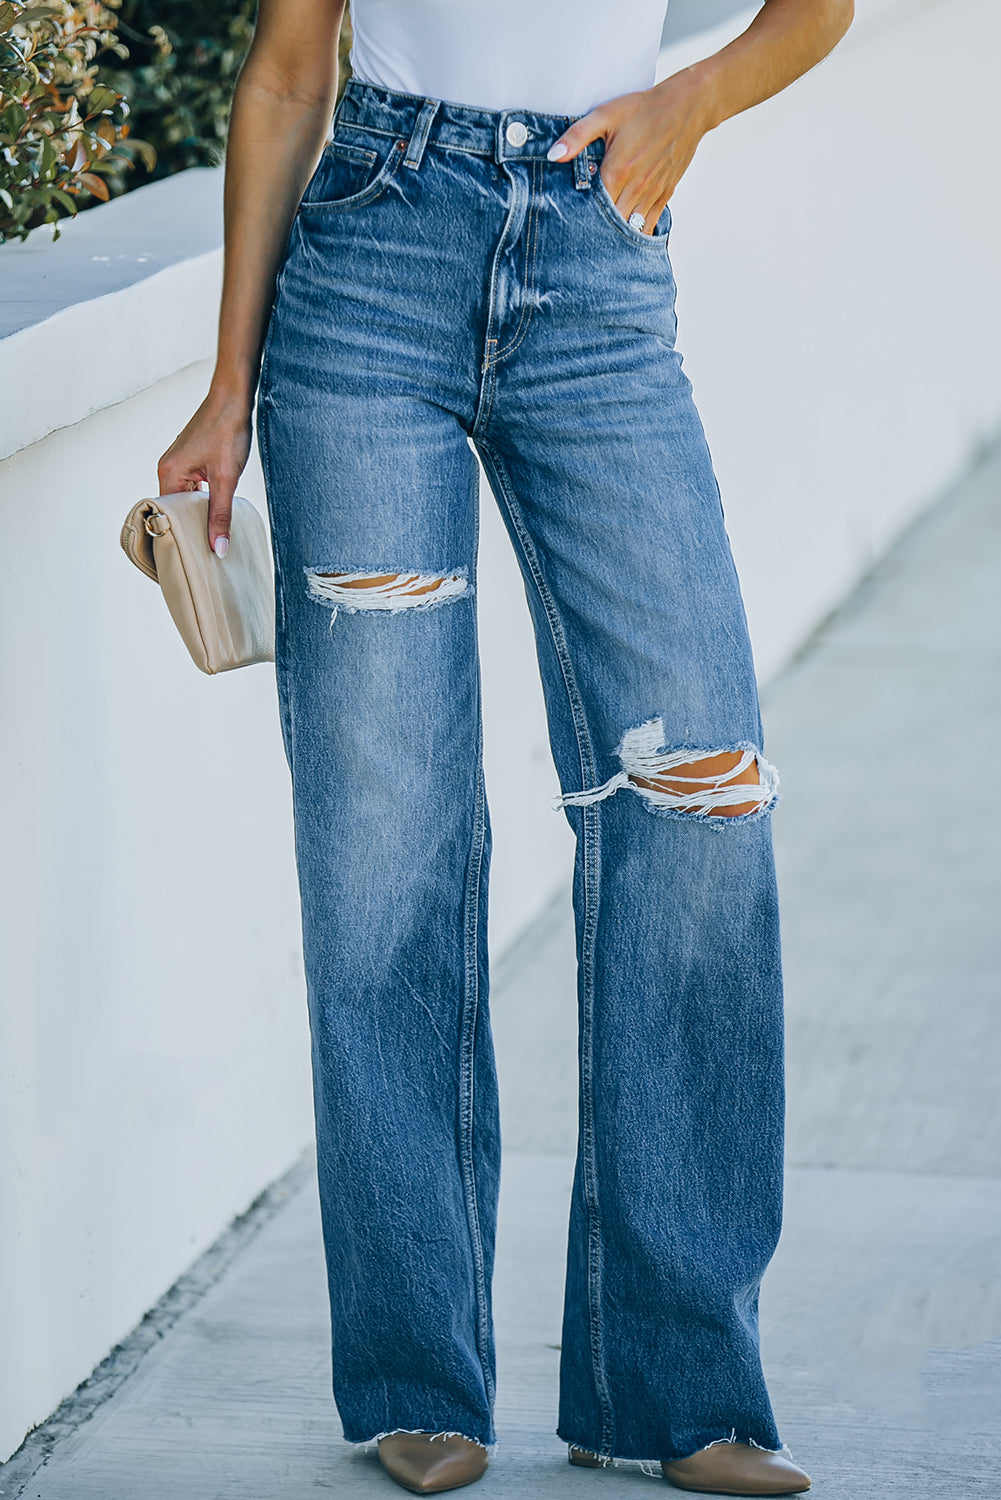 Azure Sky High-Rise Cotton Jeans | Hypoallergenic - Allergy Friendly - Naturally Free